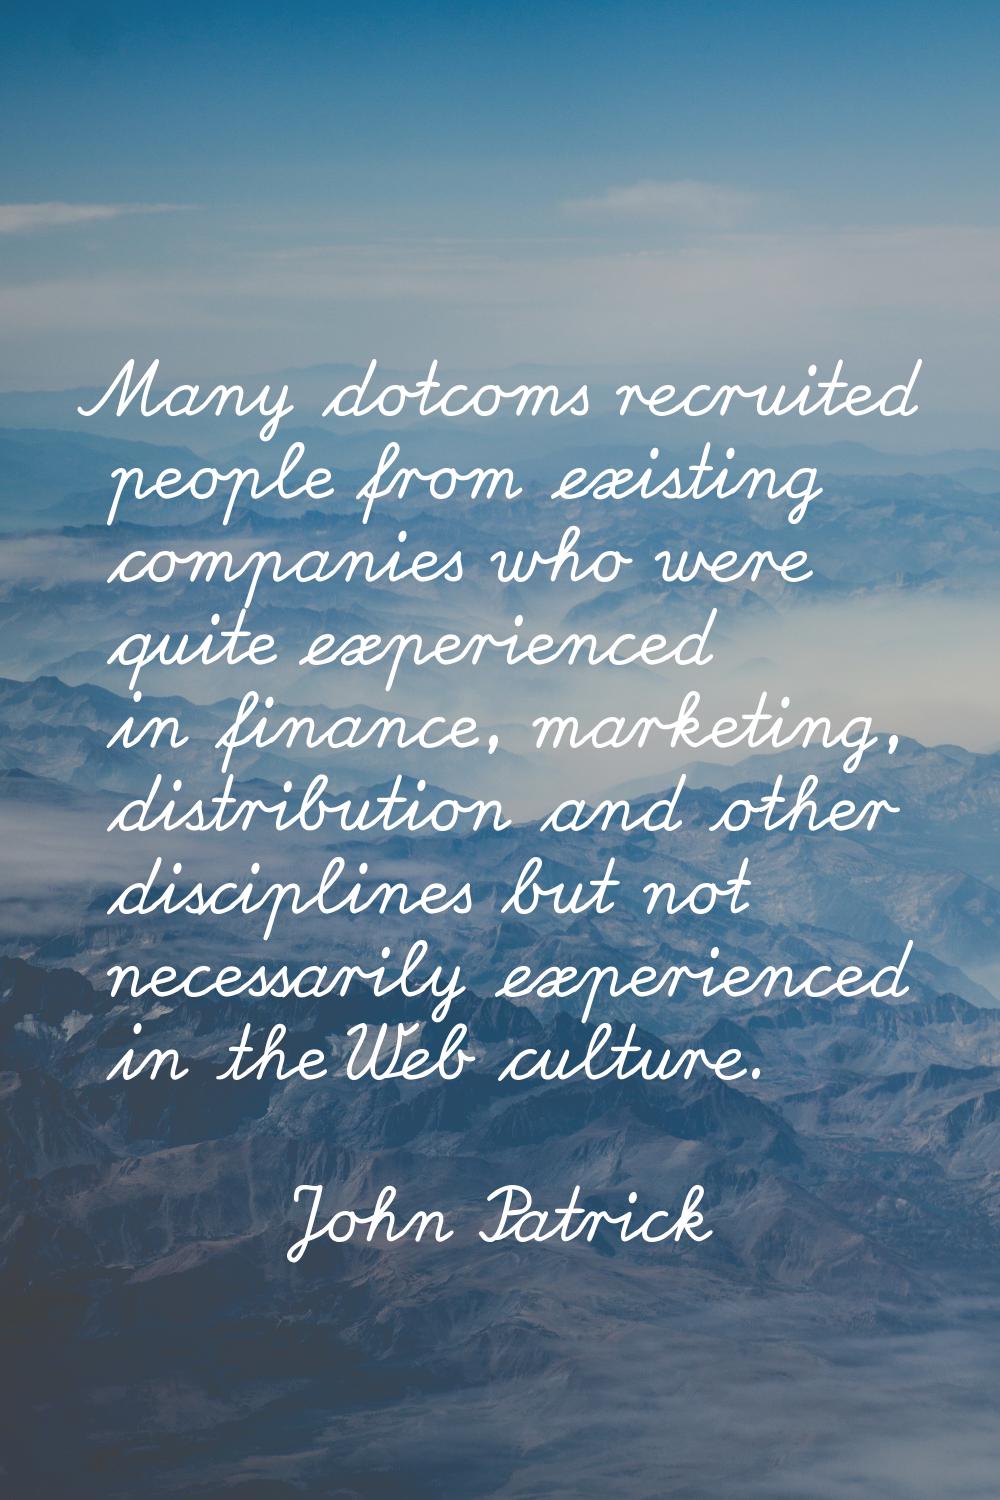 Many dotcoms recruited people from existing companies who were quite experienced in finance, market